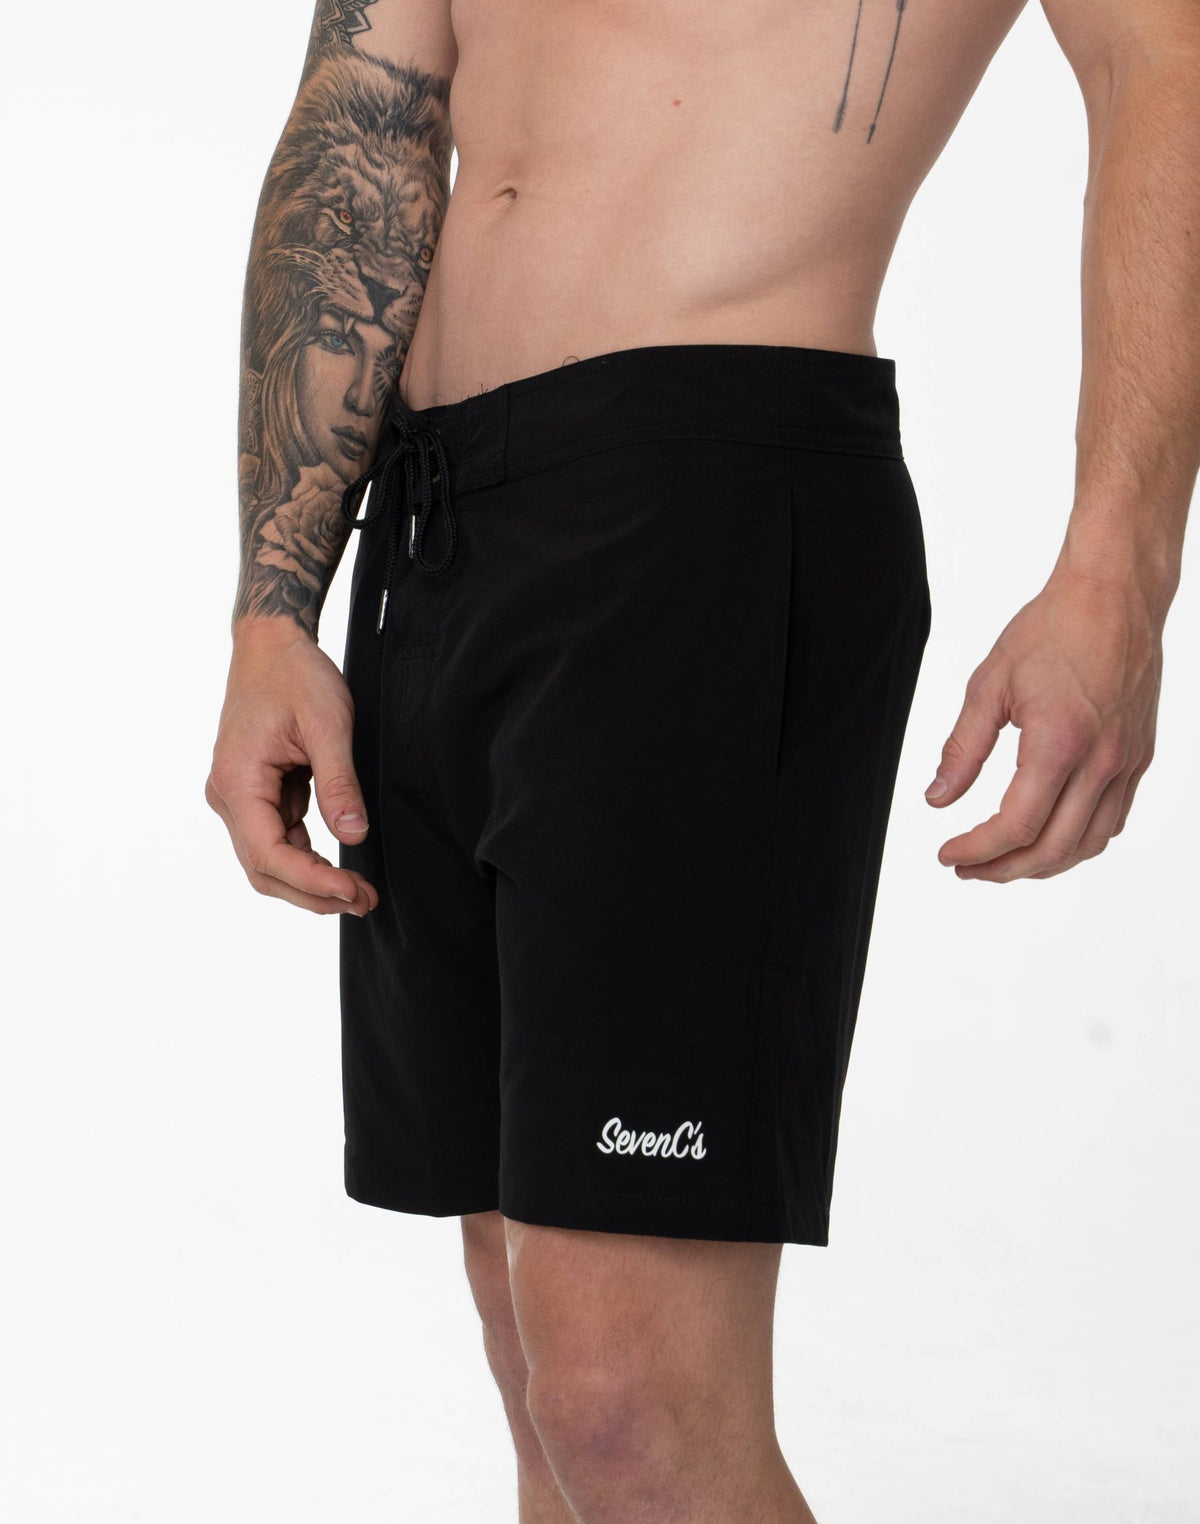 Sustainable Men's Black Board Shorts from SevenC's